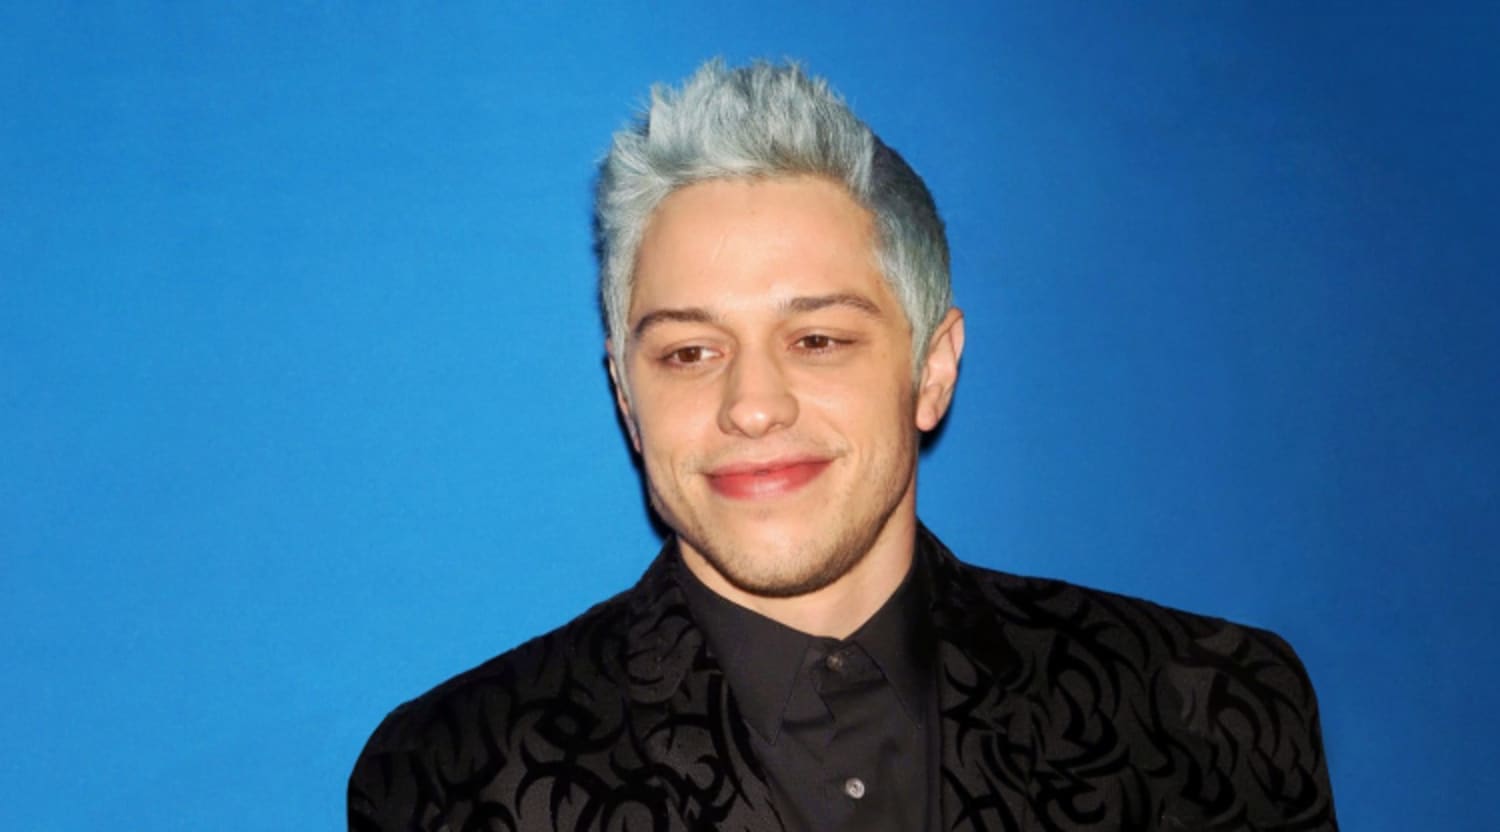 ”pete-davidson-gets-candid-about-being-as-close-as-you-can-get-to-ending-his-life-during-dark-and-scary-time”